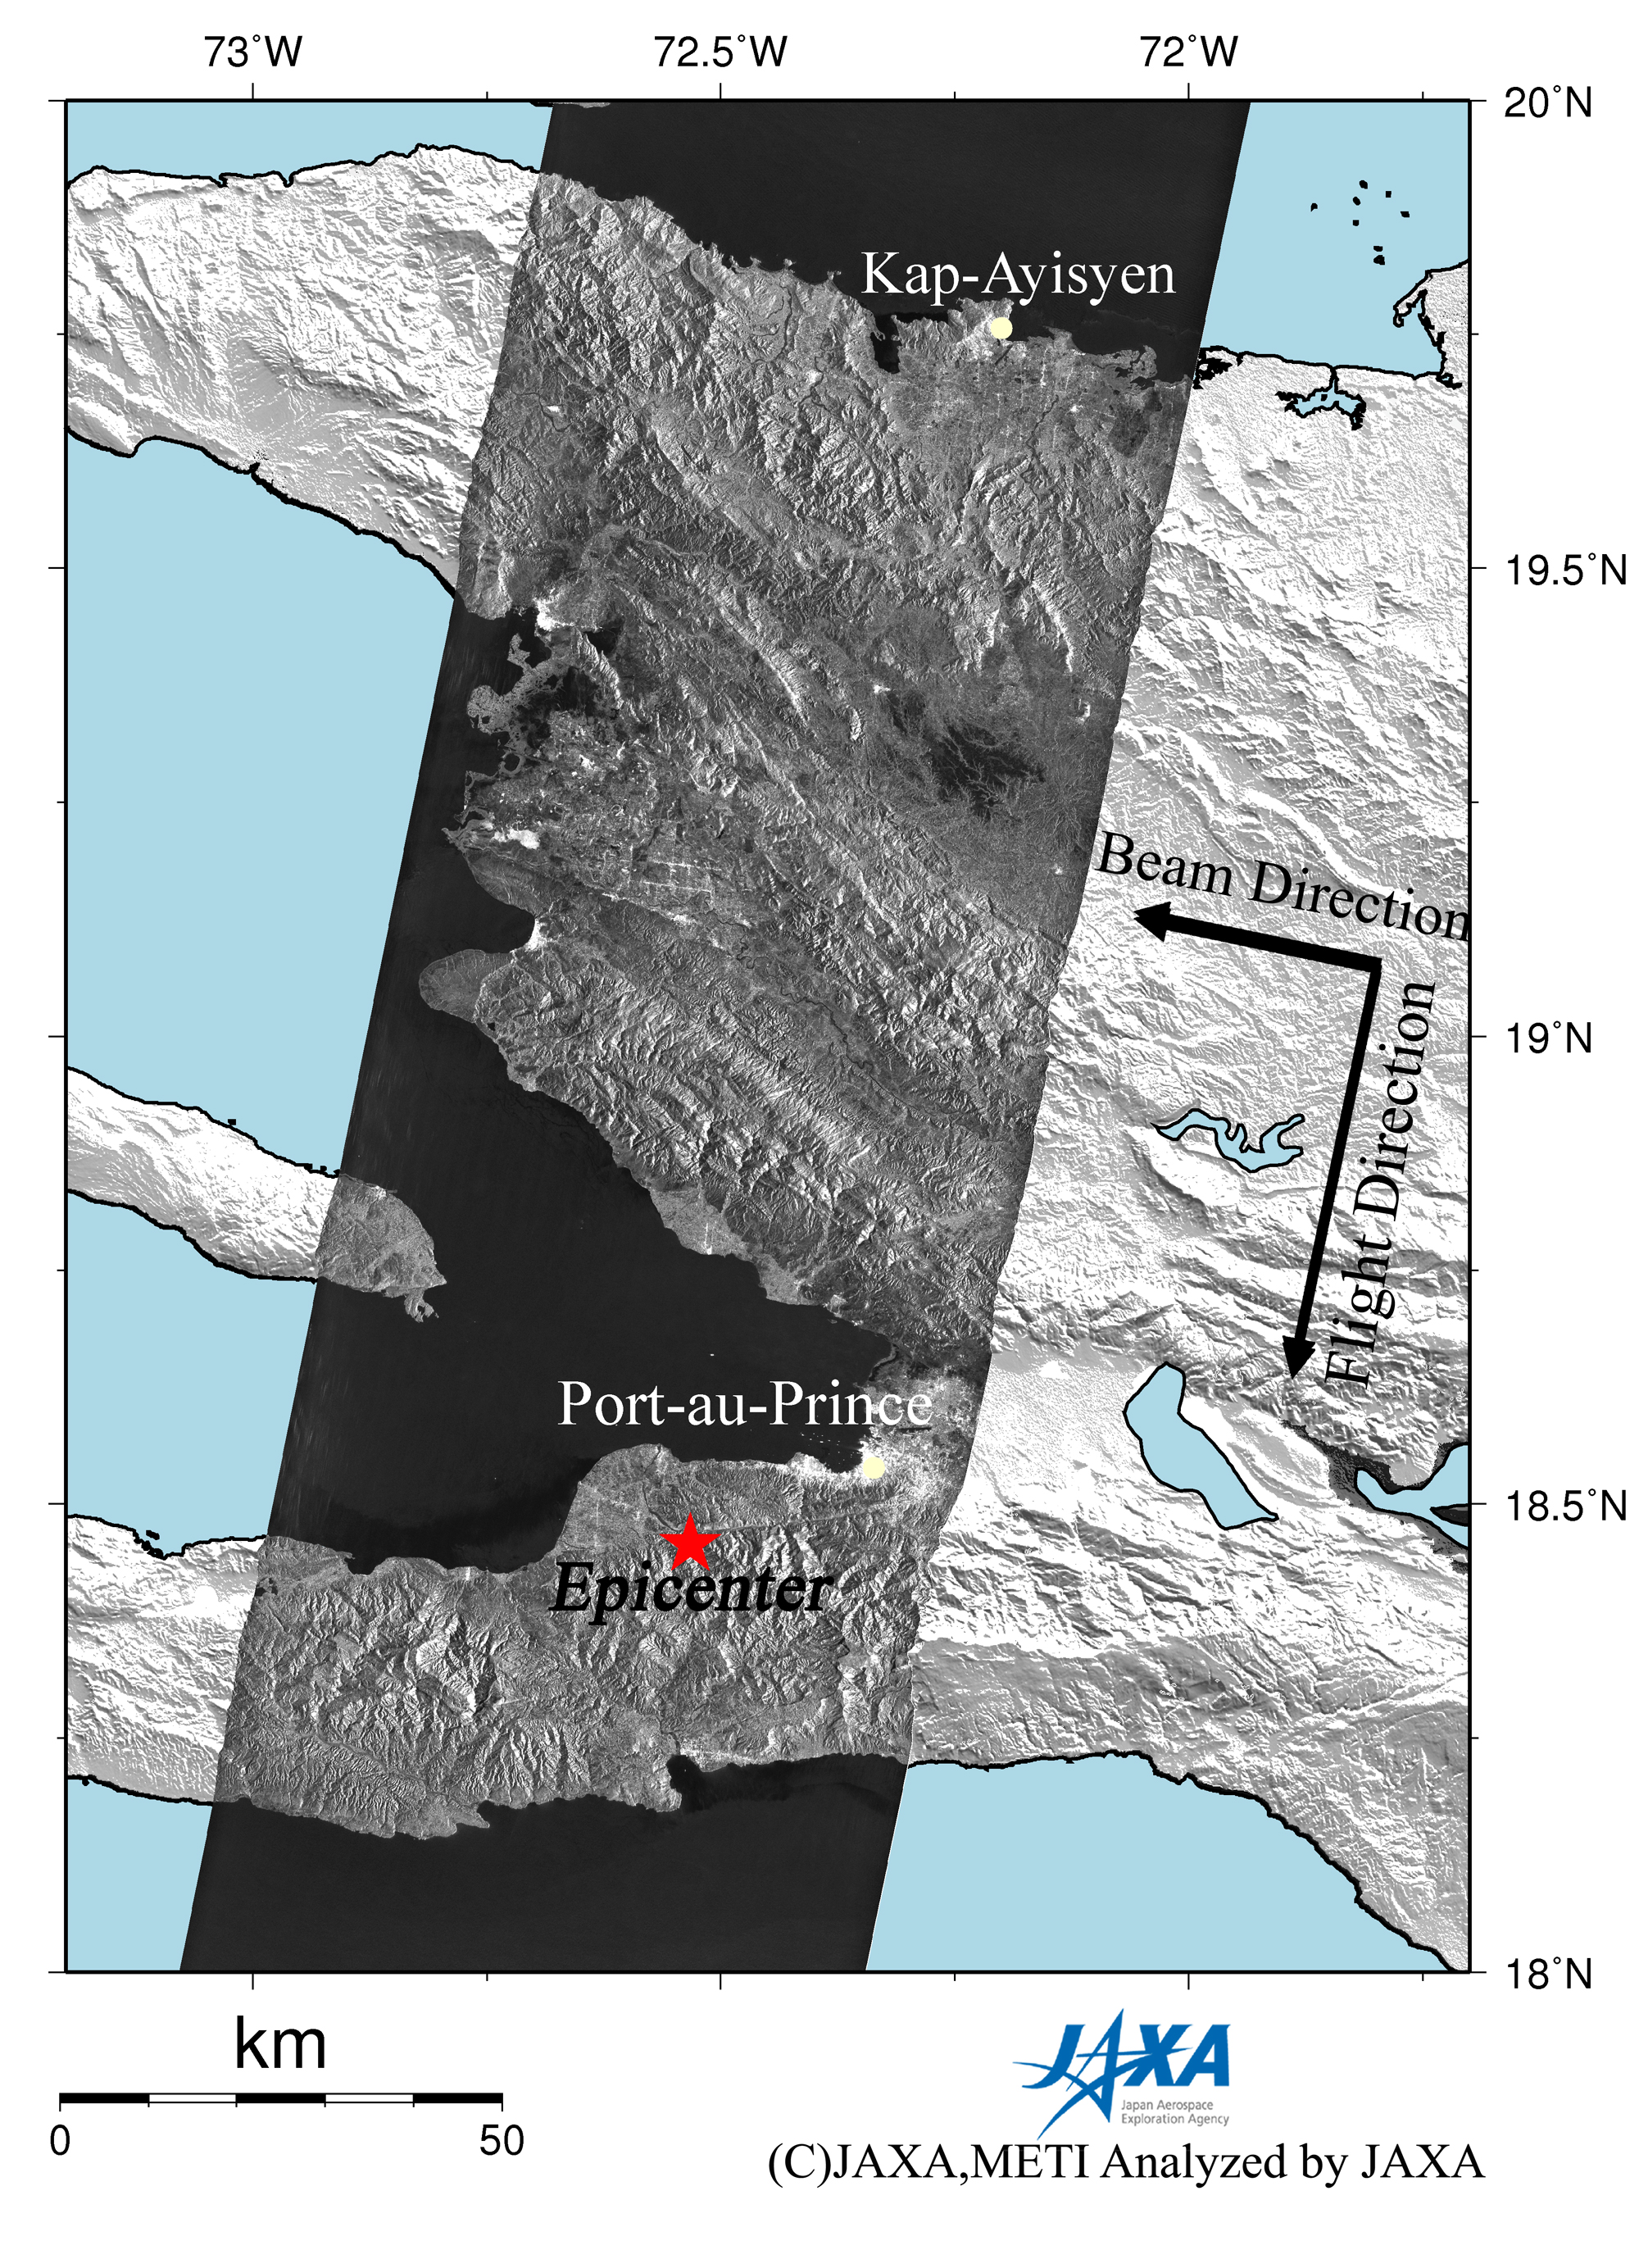 Figure 5 right is a PALSAR amplitude image acquired after the earthquake indicating an observation field of 200 km from north to south.